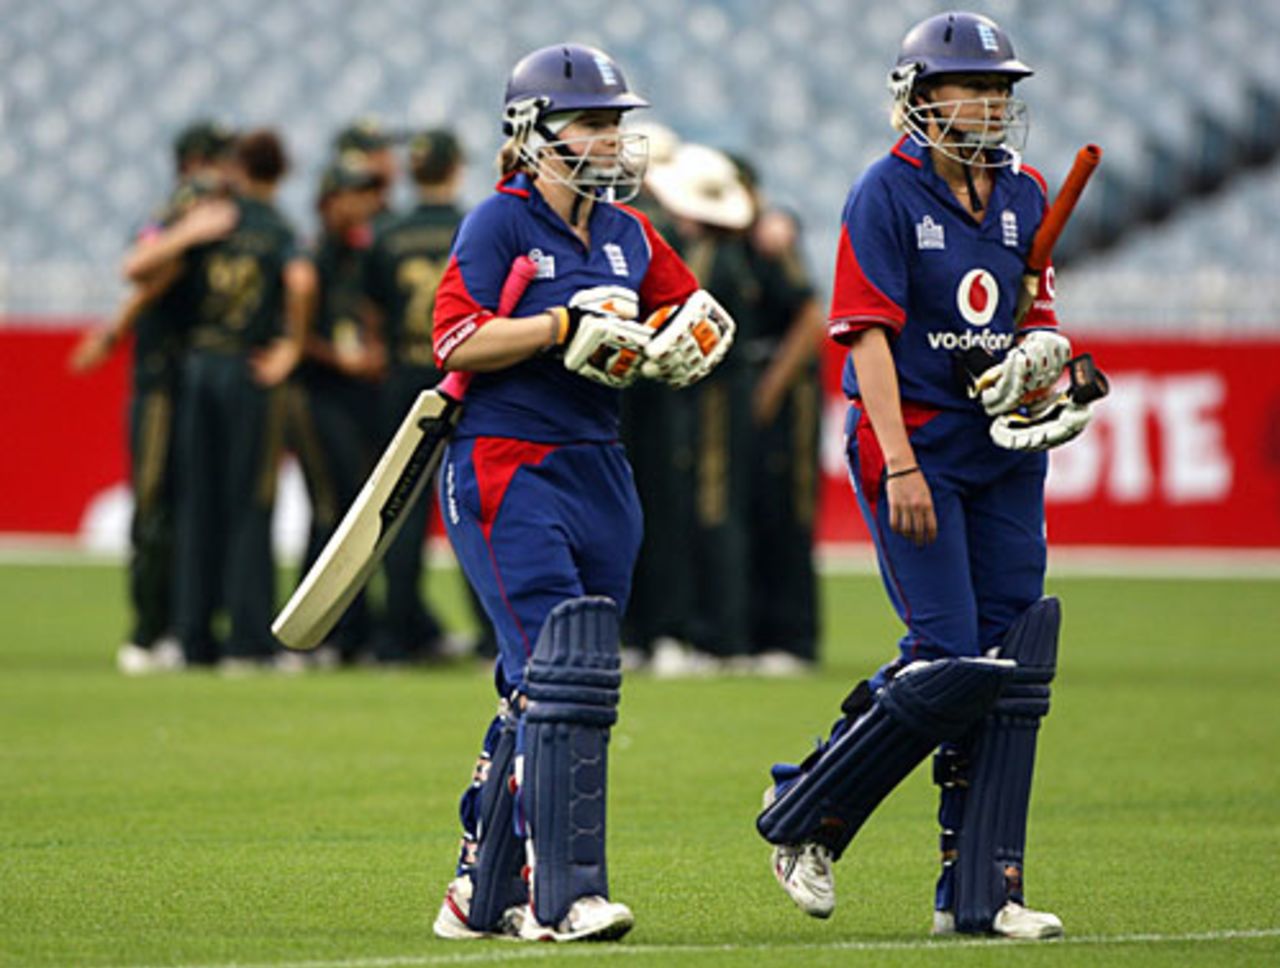 Holly Colvin and Laura Marsh walk back after England's 84-run defeat, Australia women v England women, 2nd ODI, Melbourne, February 4, 2008